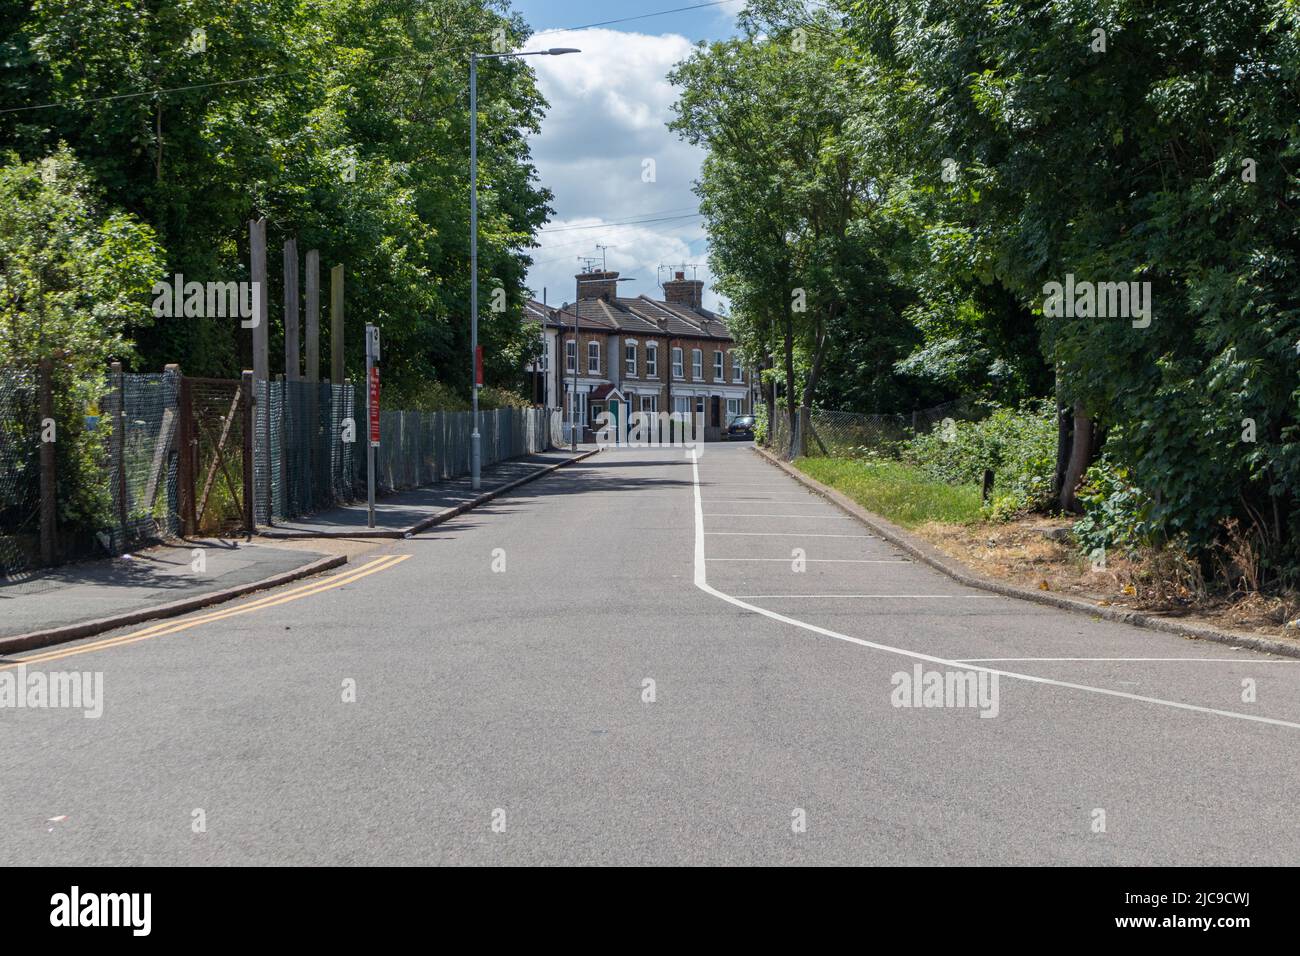 Southend on Sea, UK. 11th Jun, 2022. Station Approach, Prittlewell. Scenes near Prittlewell Station, Southend on Sea, the area Simon Dobbin was left with permanent brain damage following an assault after a Southend Utd vs Cambridge Utd match on 21st March, 2015. Mr Dobbin died on 21st October, 2020. He was 48 years old. Earlier in the week, 10th June 2022, Essex Police arrested five men in connection with the assault. Penelope Barritt/Alamy Live News Stock Photo